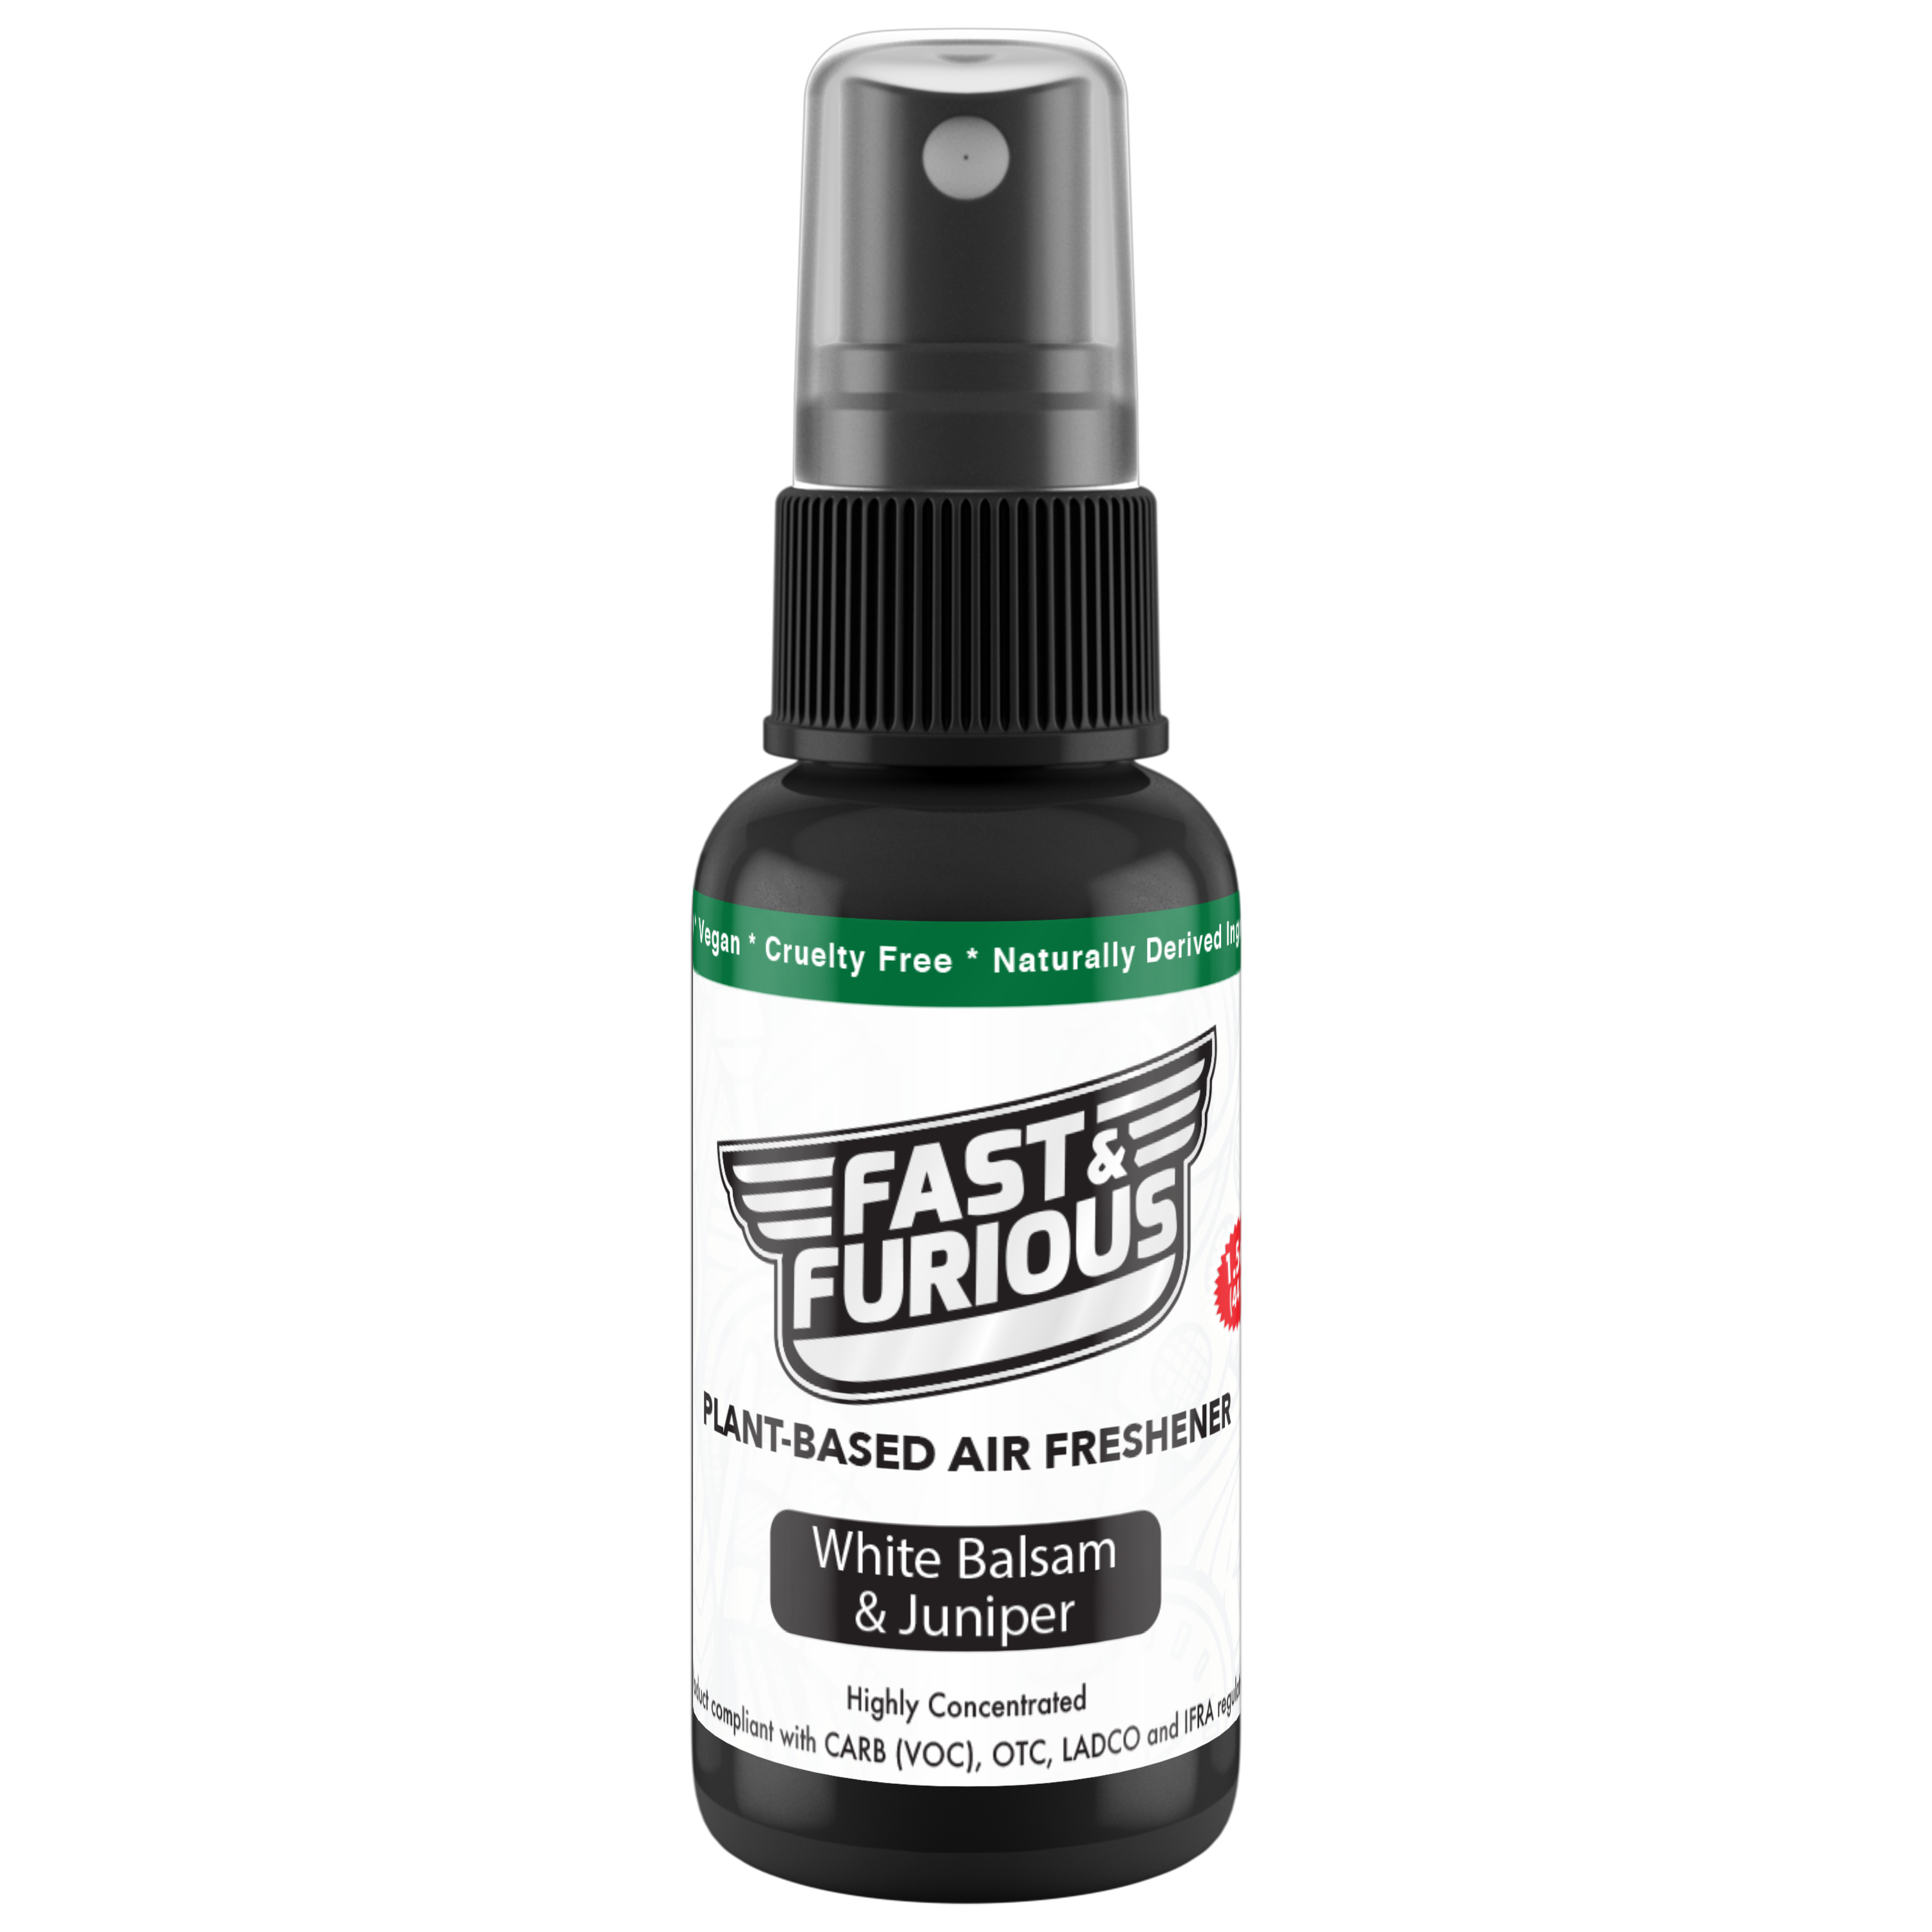 Fast and Furious Plant-Based Air Freshener - White Balsam & Juniper Scent